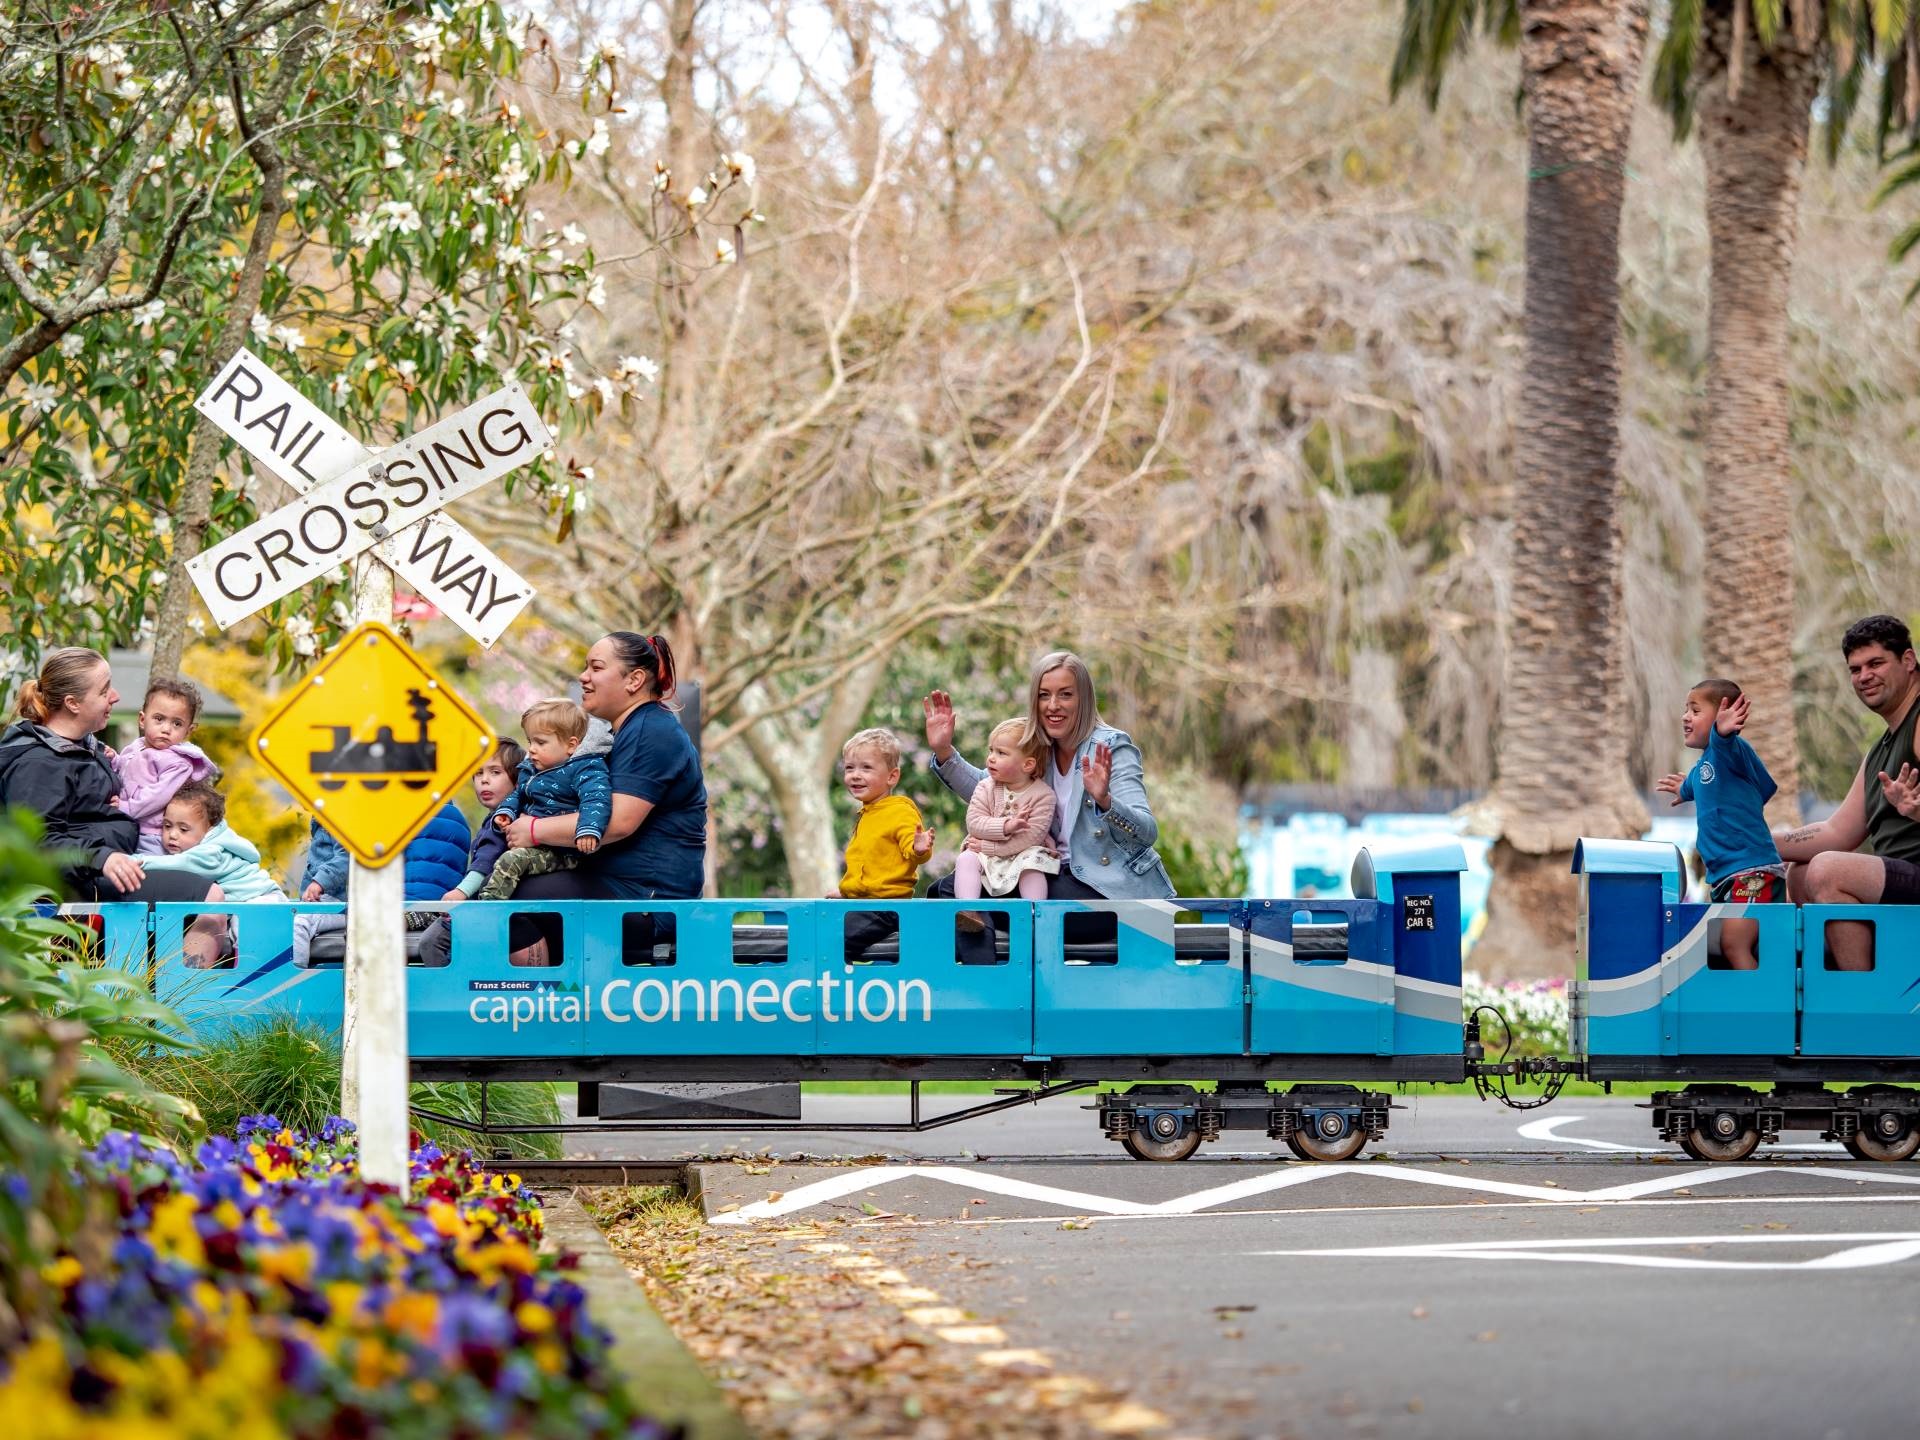 Photo shows families riding on miniature train at a railway crossing in the Esplanade.